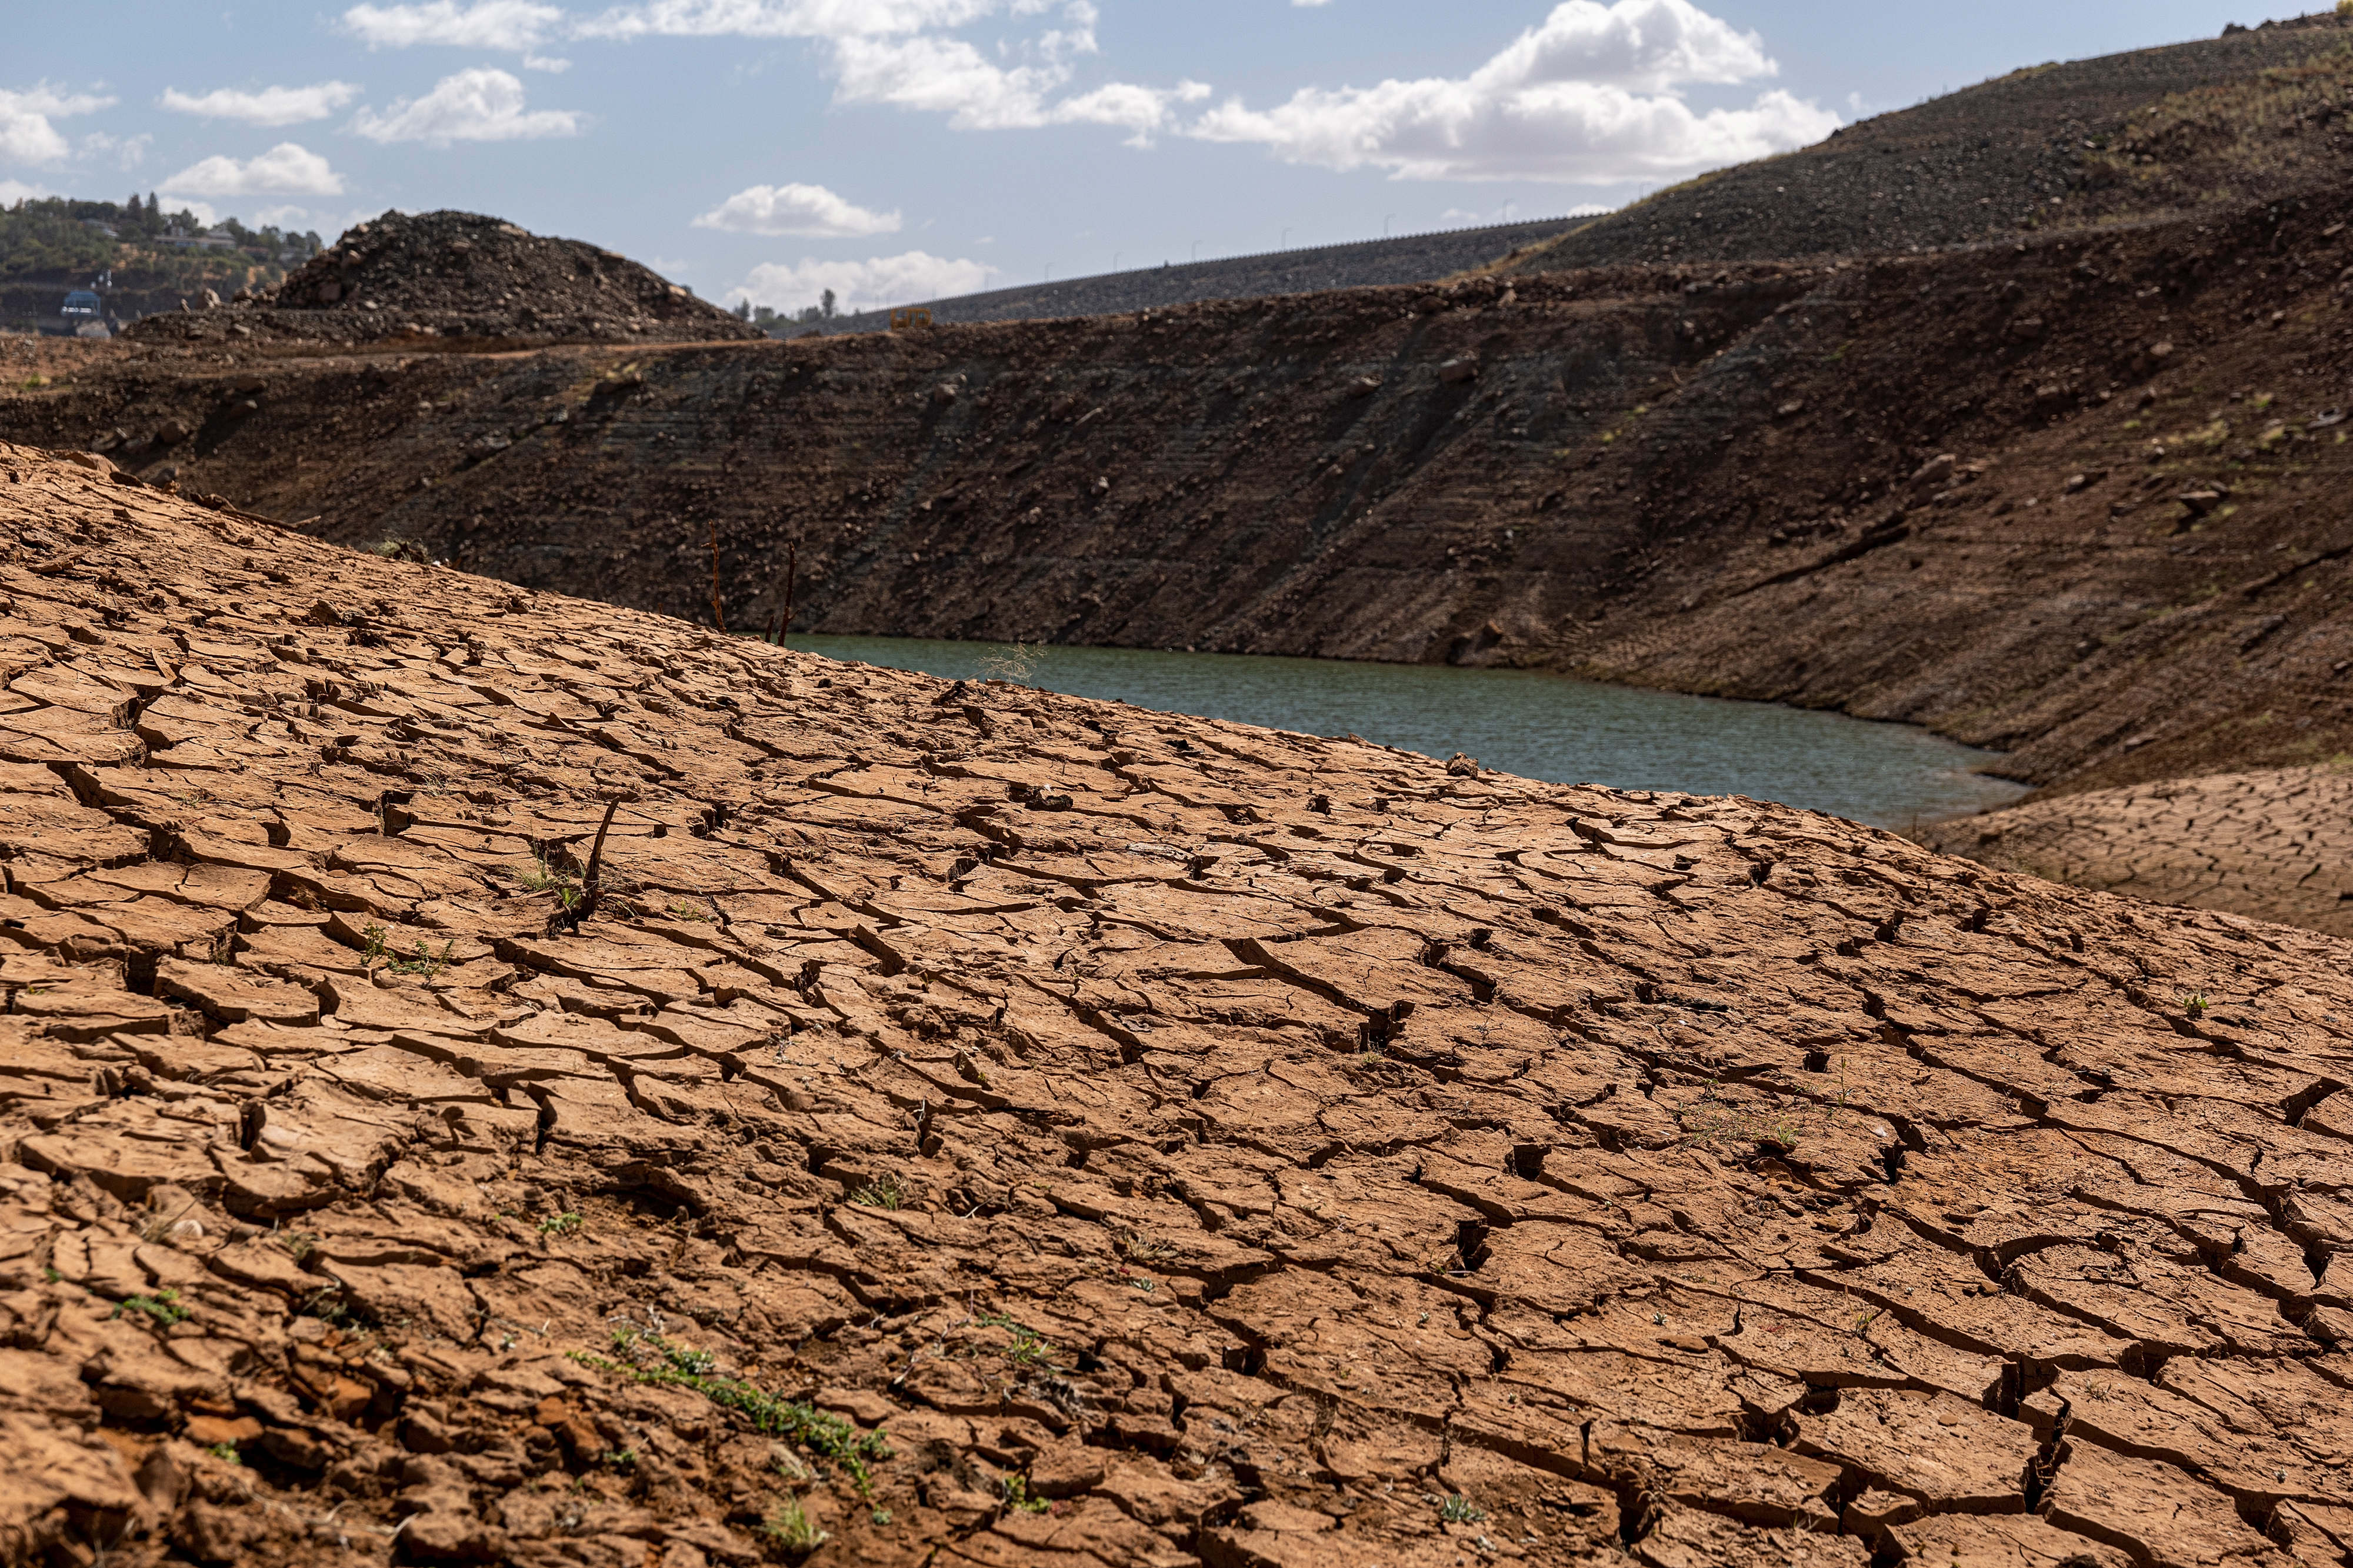 Western drought fueled by climate change is the worst in 1200 years scientists say – CNBC